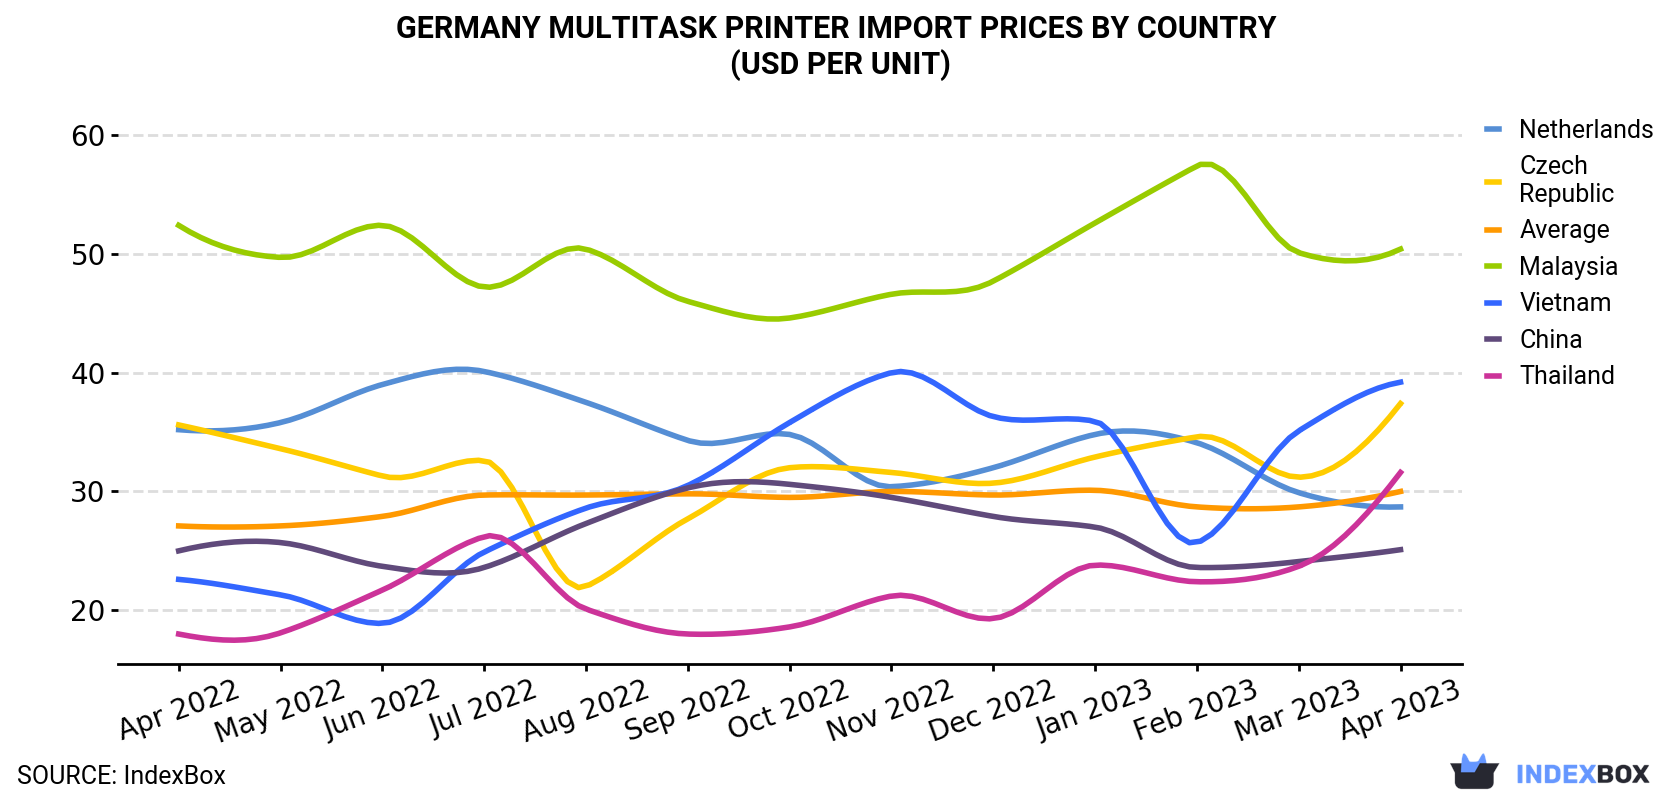 Germany Multitask Printer Import Prices By Country (USD Per Unit)